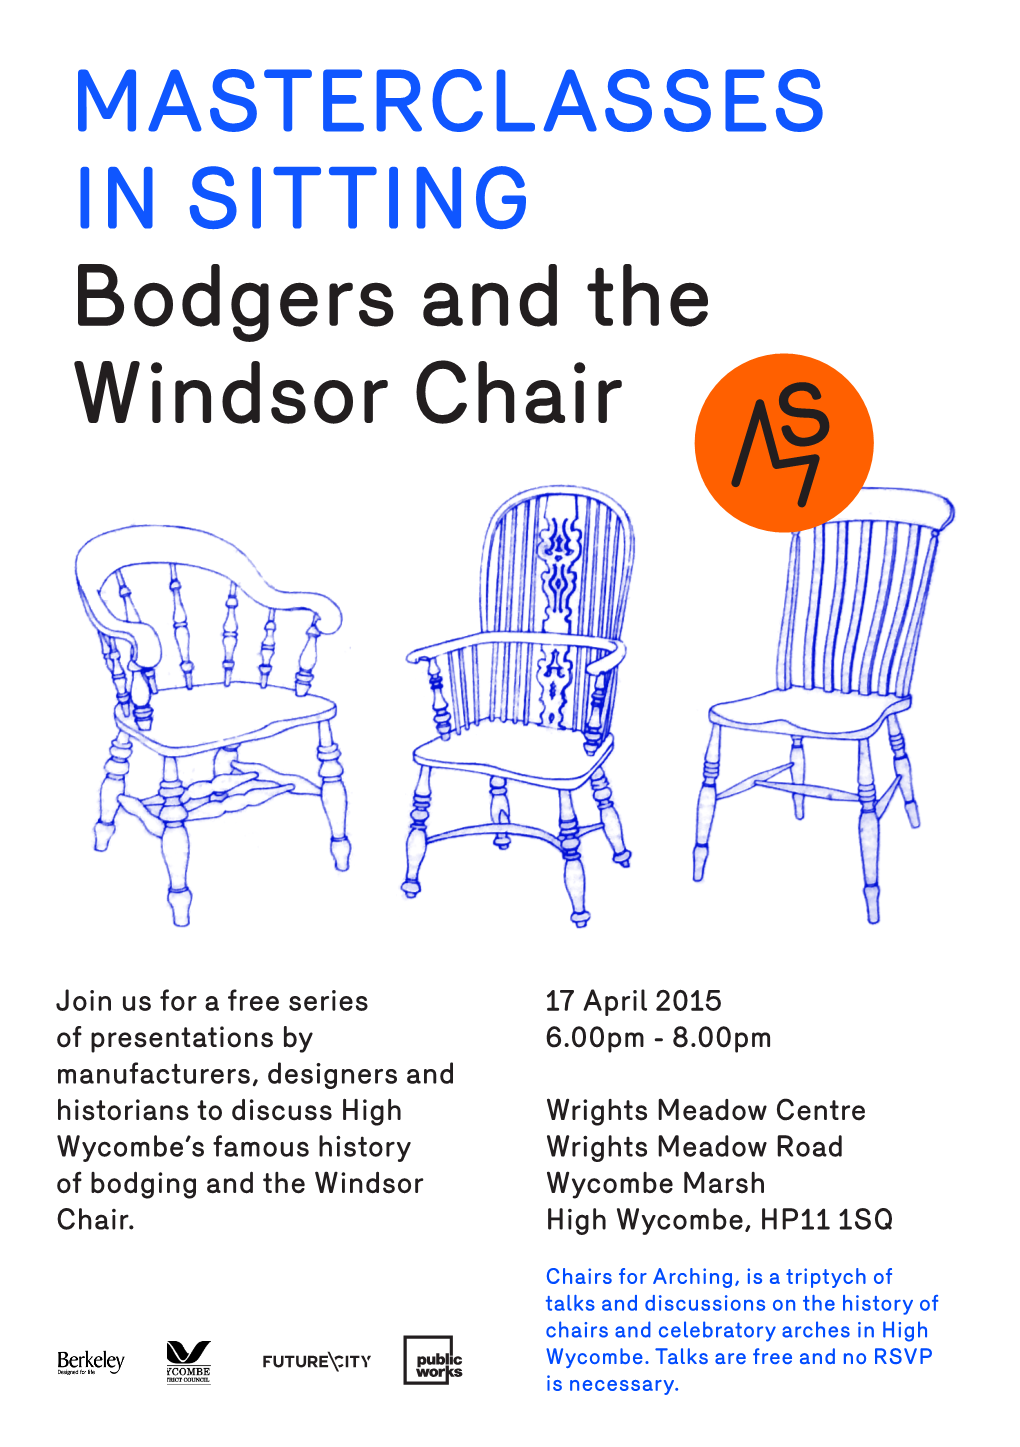 MASTERCLASSES in SITTING Bodgers and the Windsor Chair